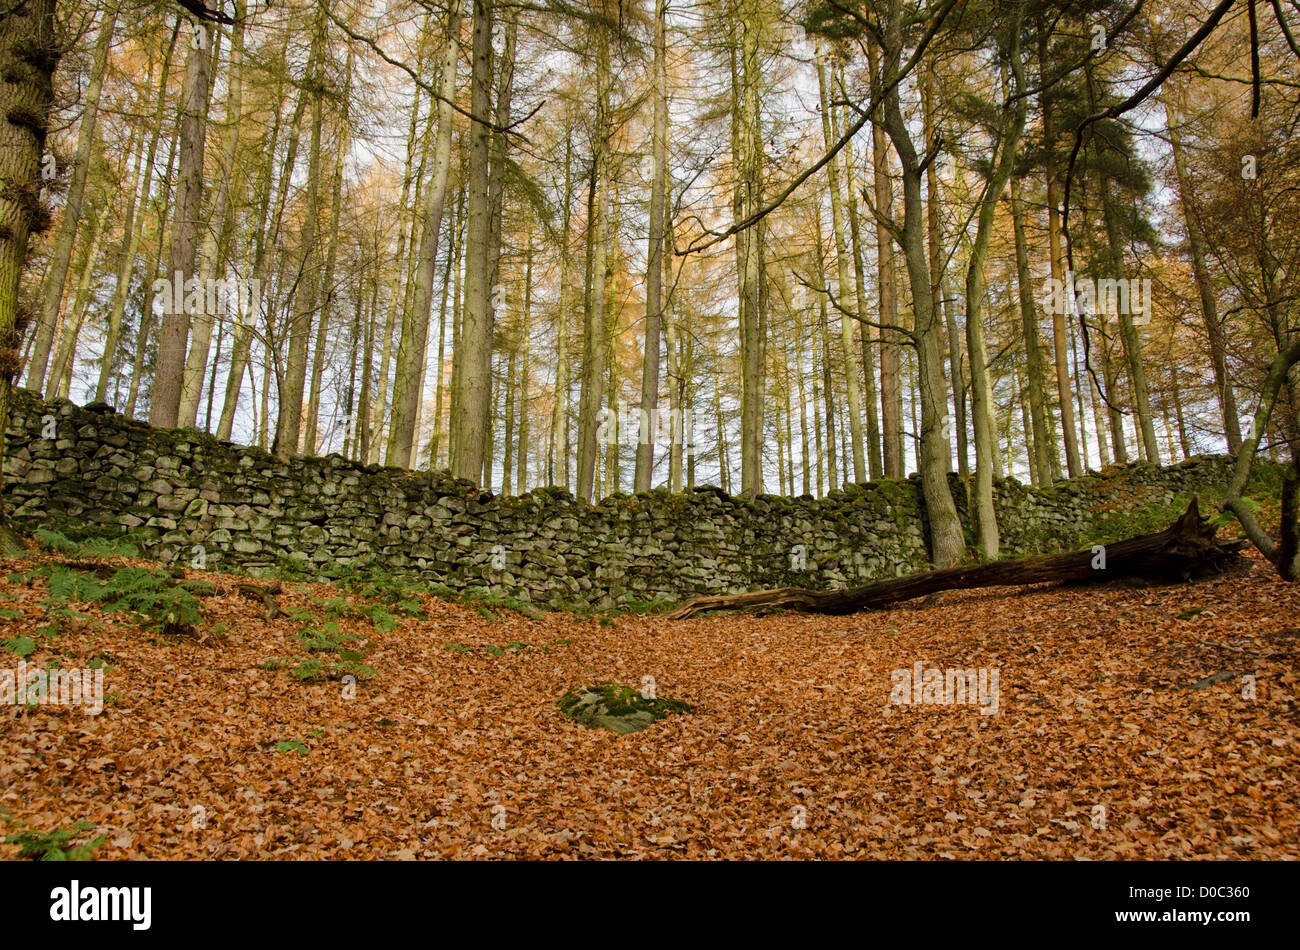 Fallen leaves carpeting forest floor in autumn & towering coniferous trees growing on hillside - Bolton Abbey Estate, North Yorkshire, England, UK. Stock Photo